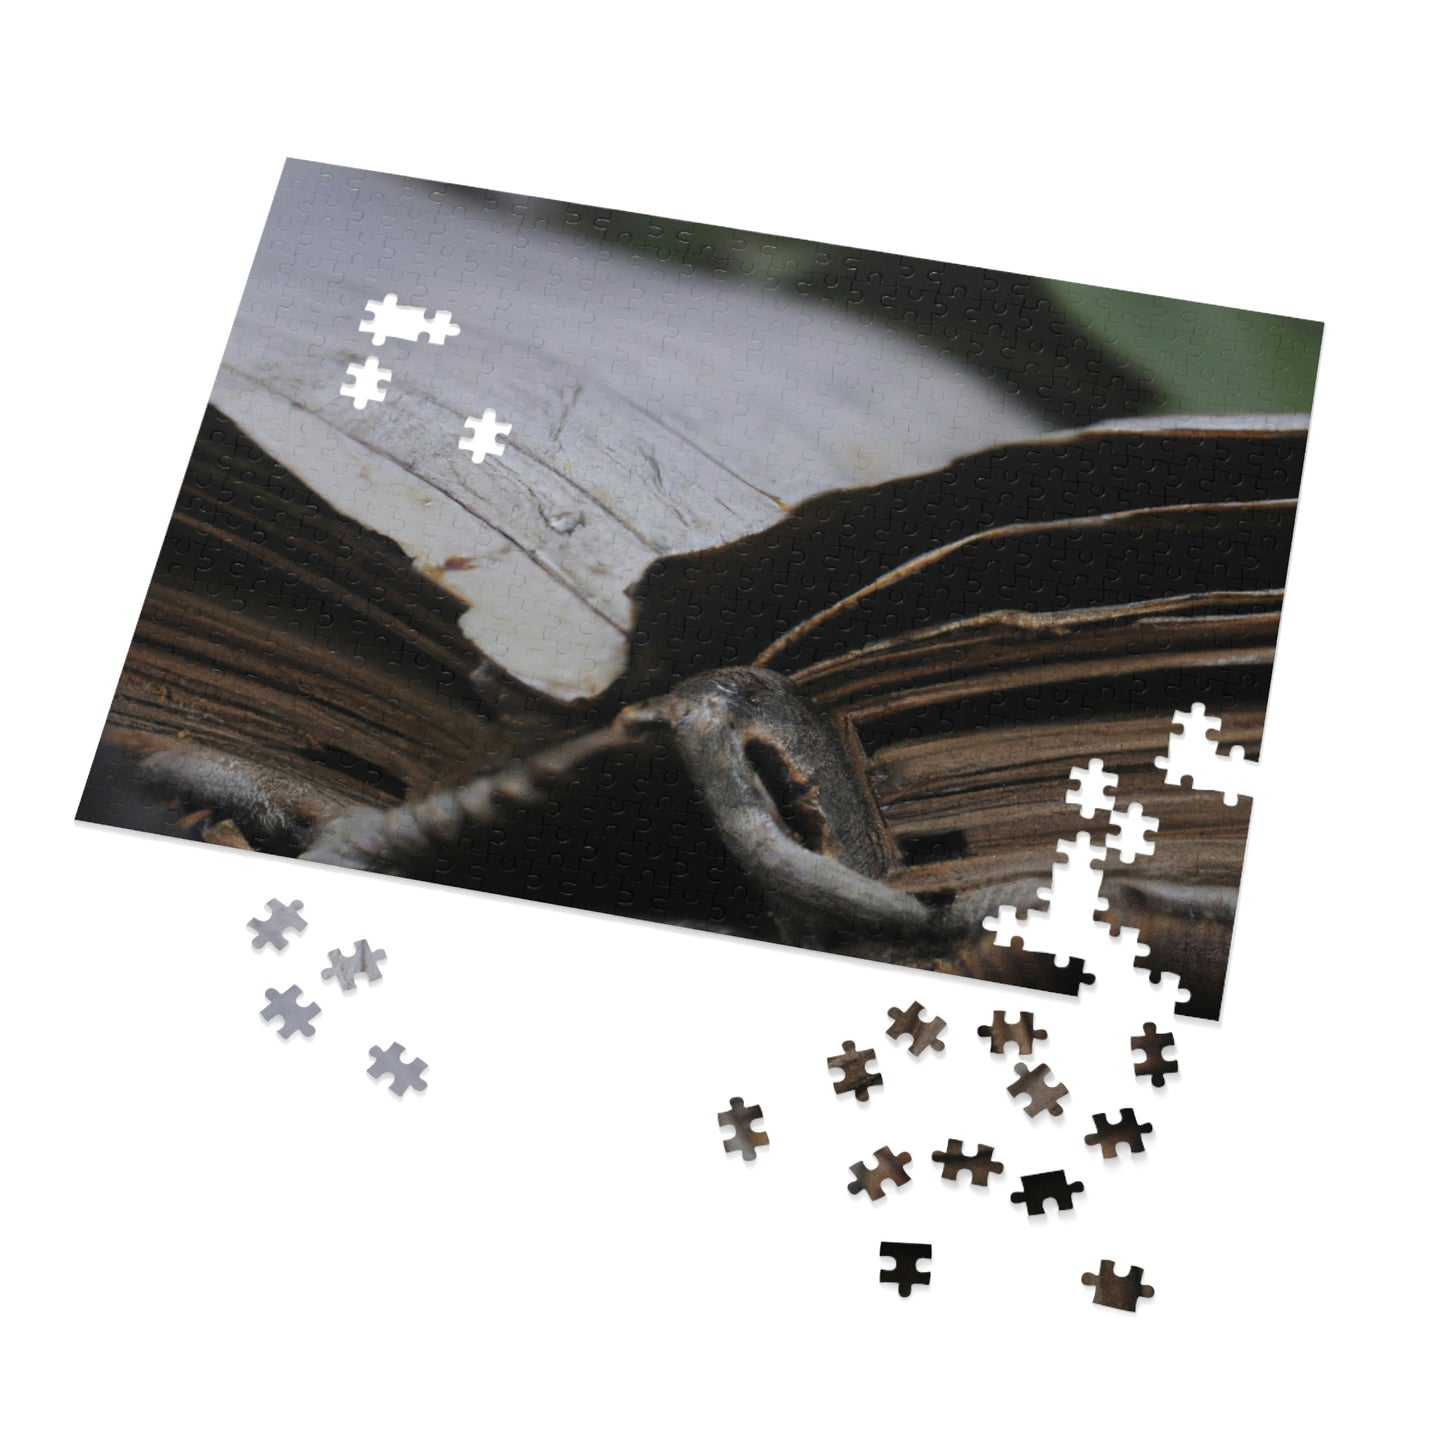 Unbeknownst to its readers, the book possesses magical powers.

"The Forgotten Tome of Magic" - The Alien Jigsaw Puzzle